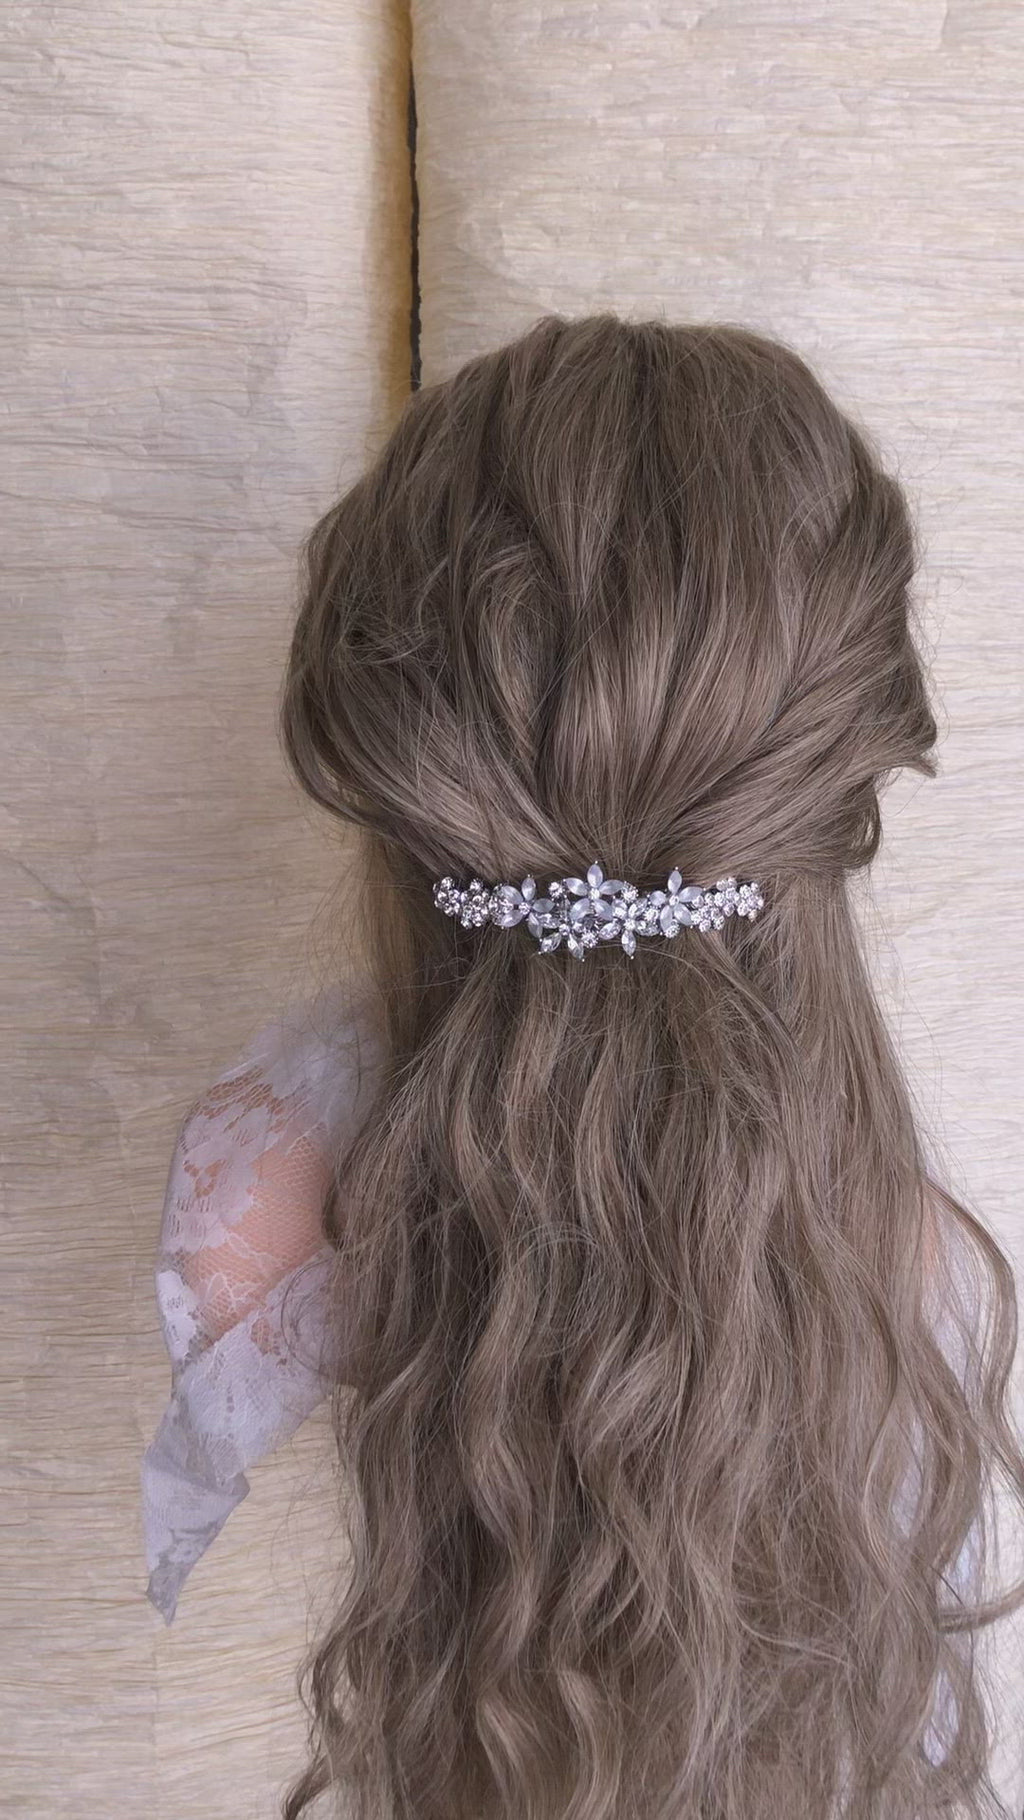 A long hair barrette with a crystal flower design for weddings